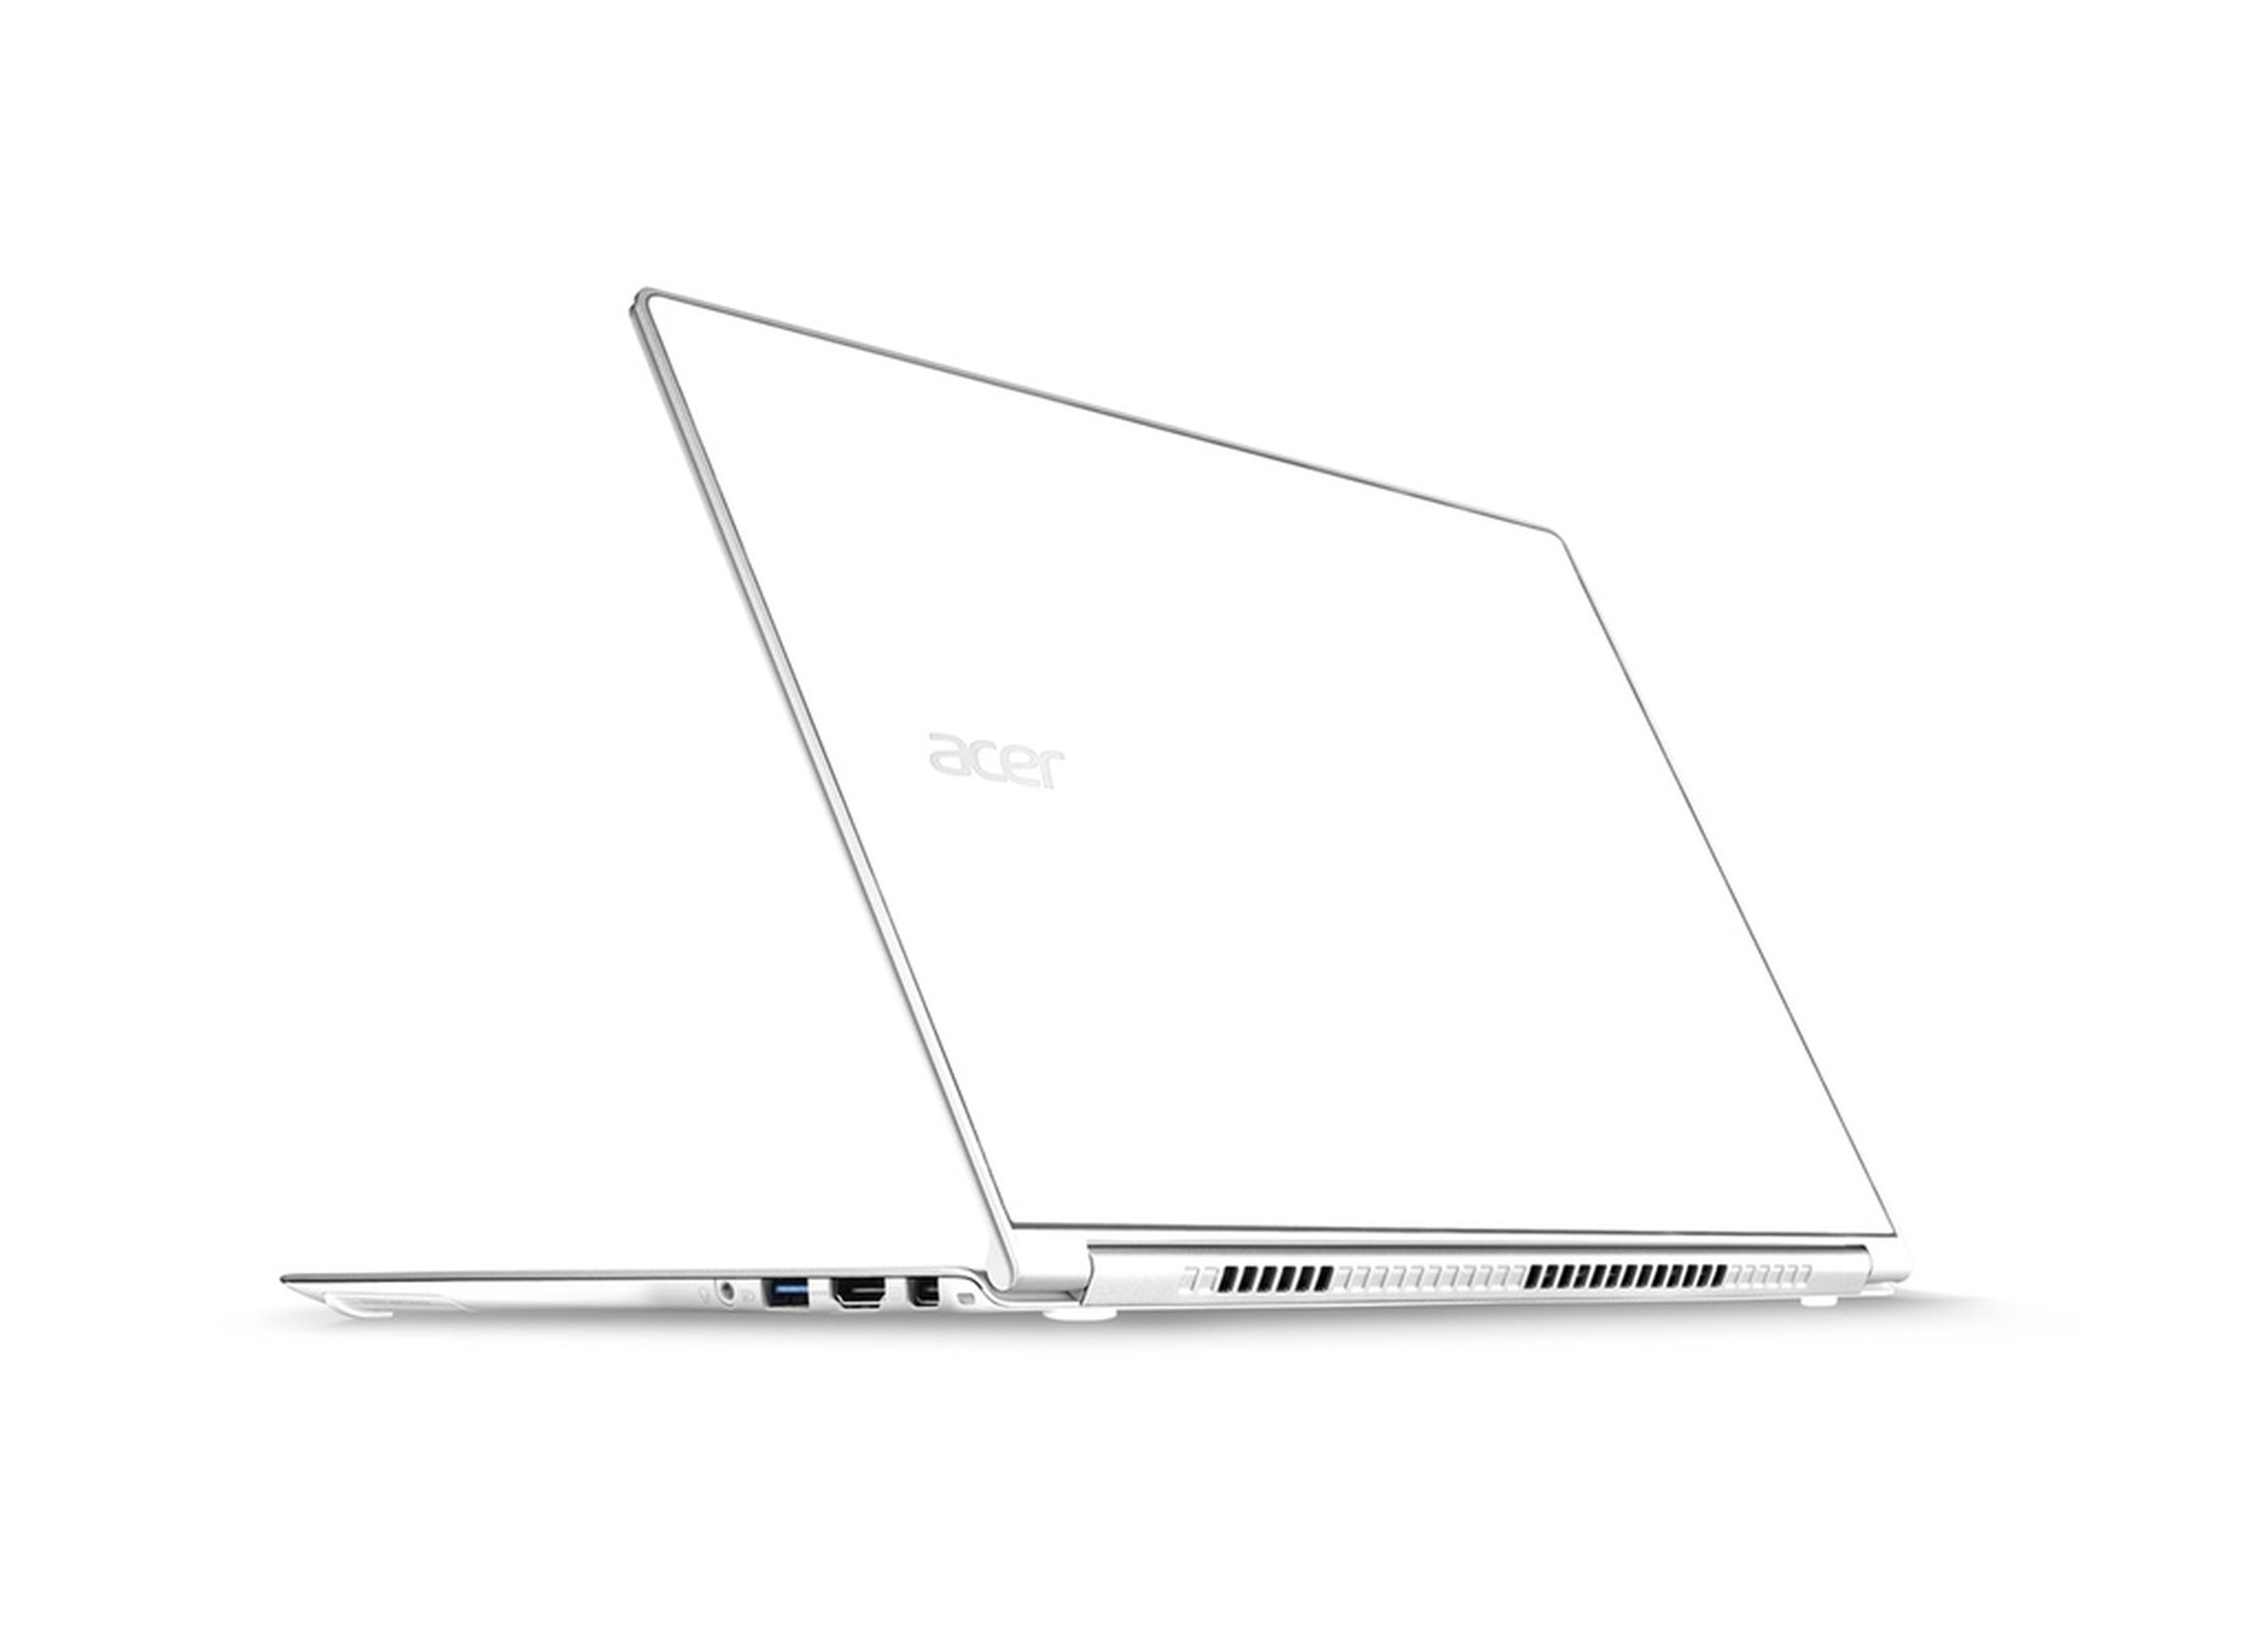 Acer Aspire S7, Aspire S3, and Z3 images